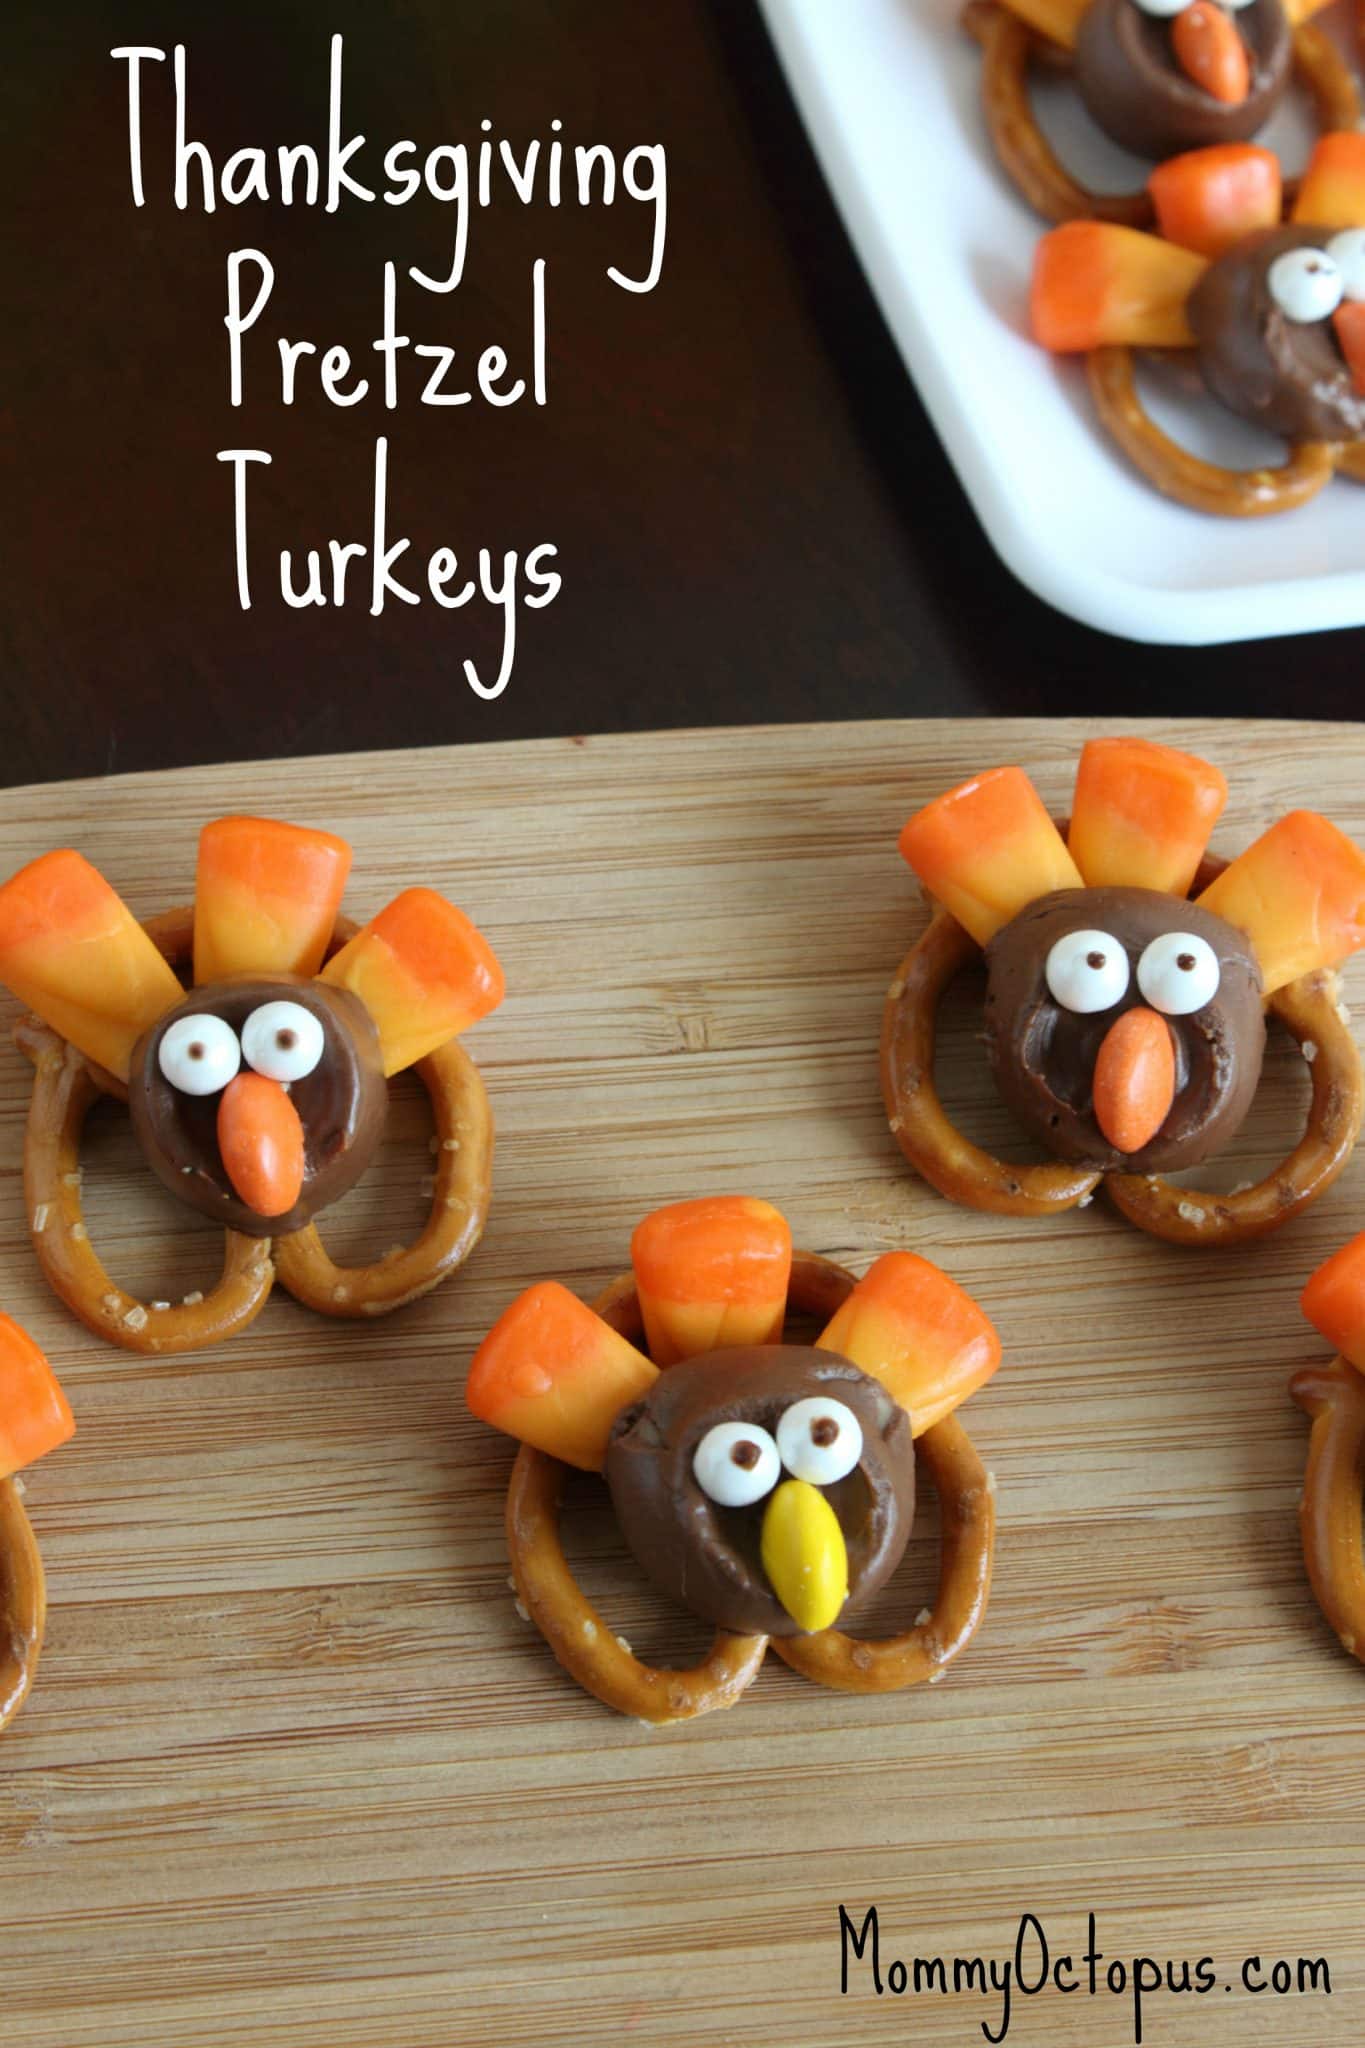 Whether you are hosting or bringing some treats with you to the dinner you are attending, these 5-Minute Thanksgiving Treats are great ideas for you!